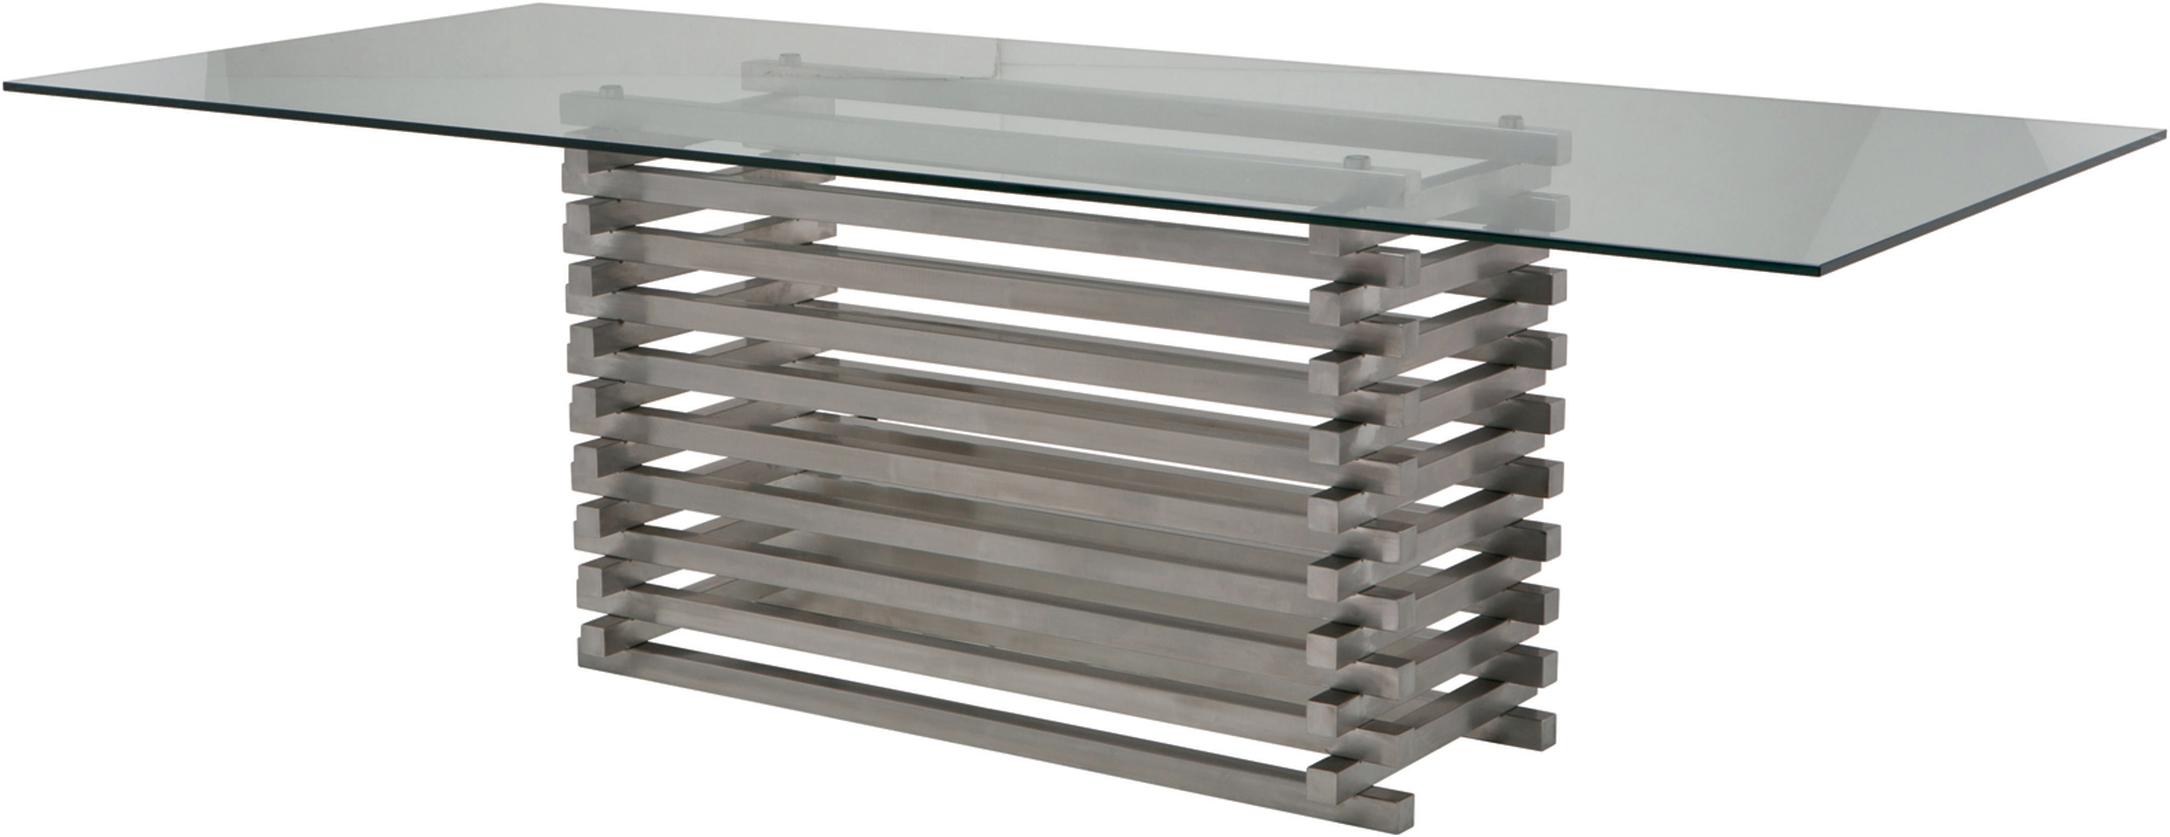 the stacked dining table in brushed stainless steel